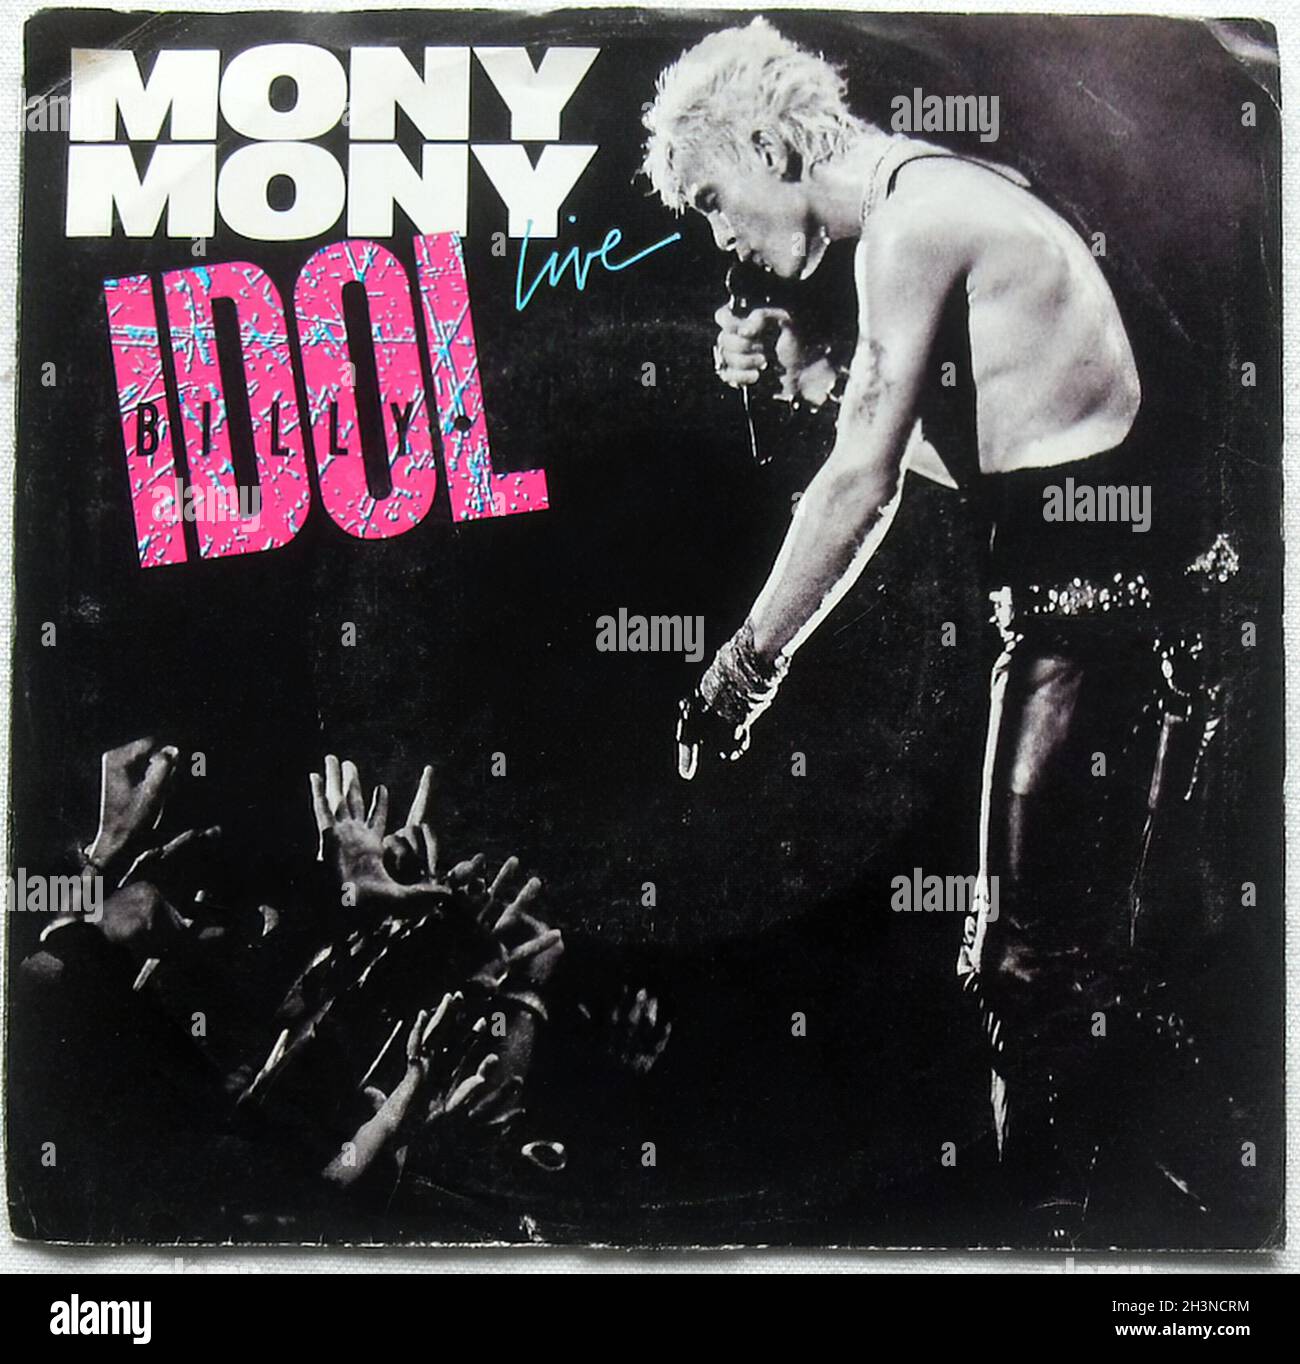 1987 Billy Idol Mony Mony 7 Inch Single 45 Rpm Record Sleeve Cover Graphics 1980s Stock Photo